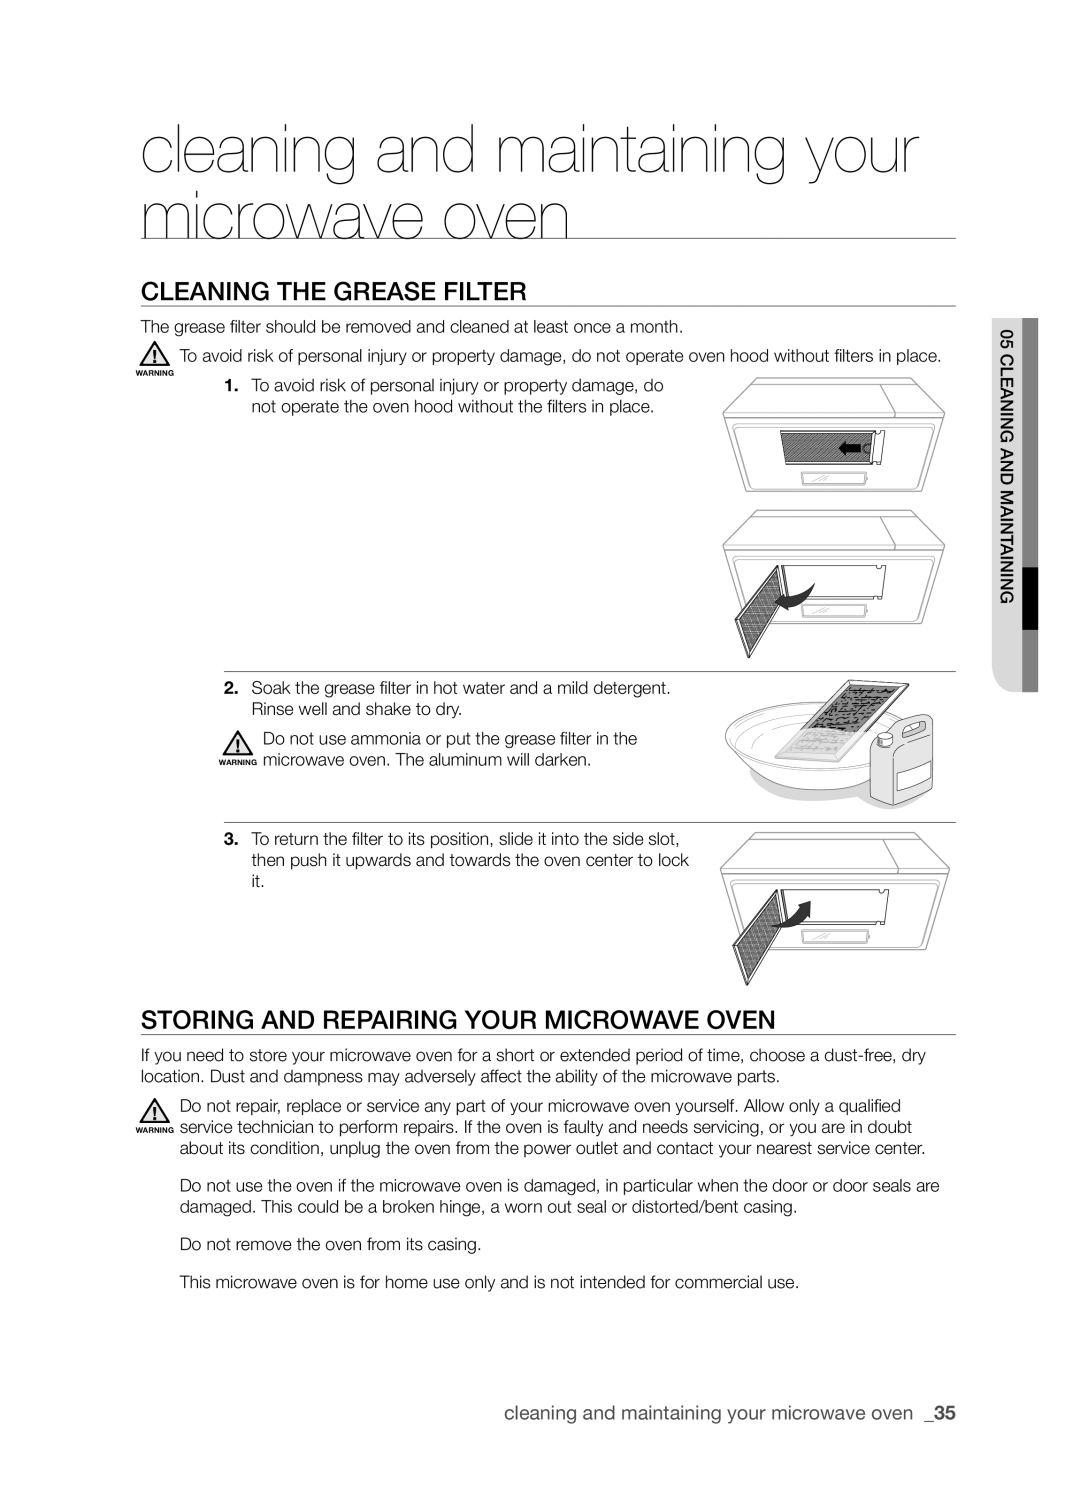 Samsung SMH8165STG user manual Cleaning the grease filter, Storing and repairing your microwave oven 